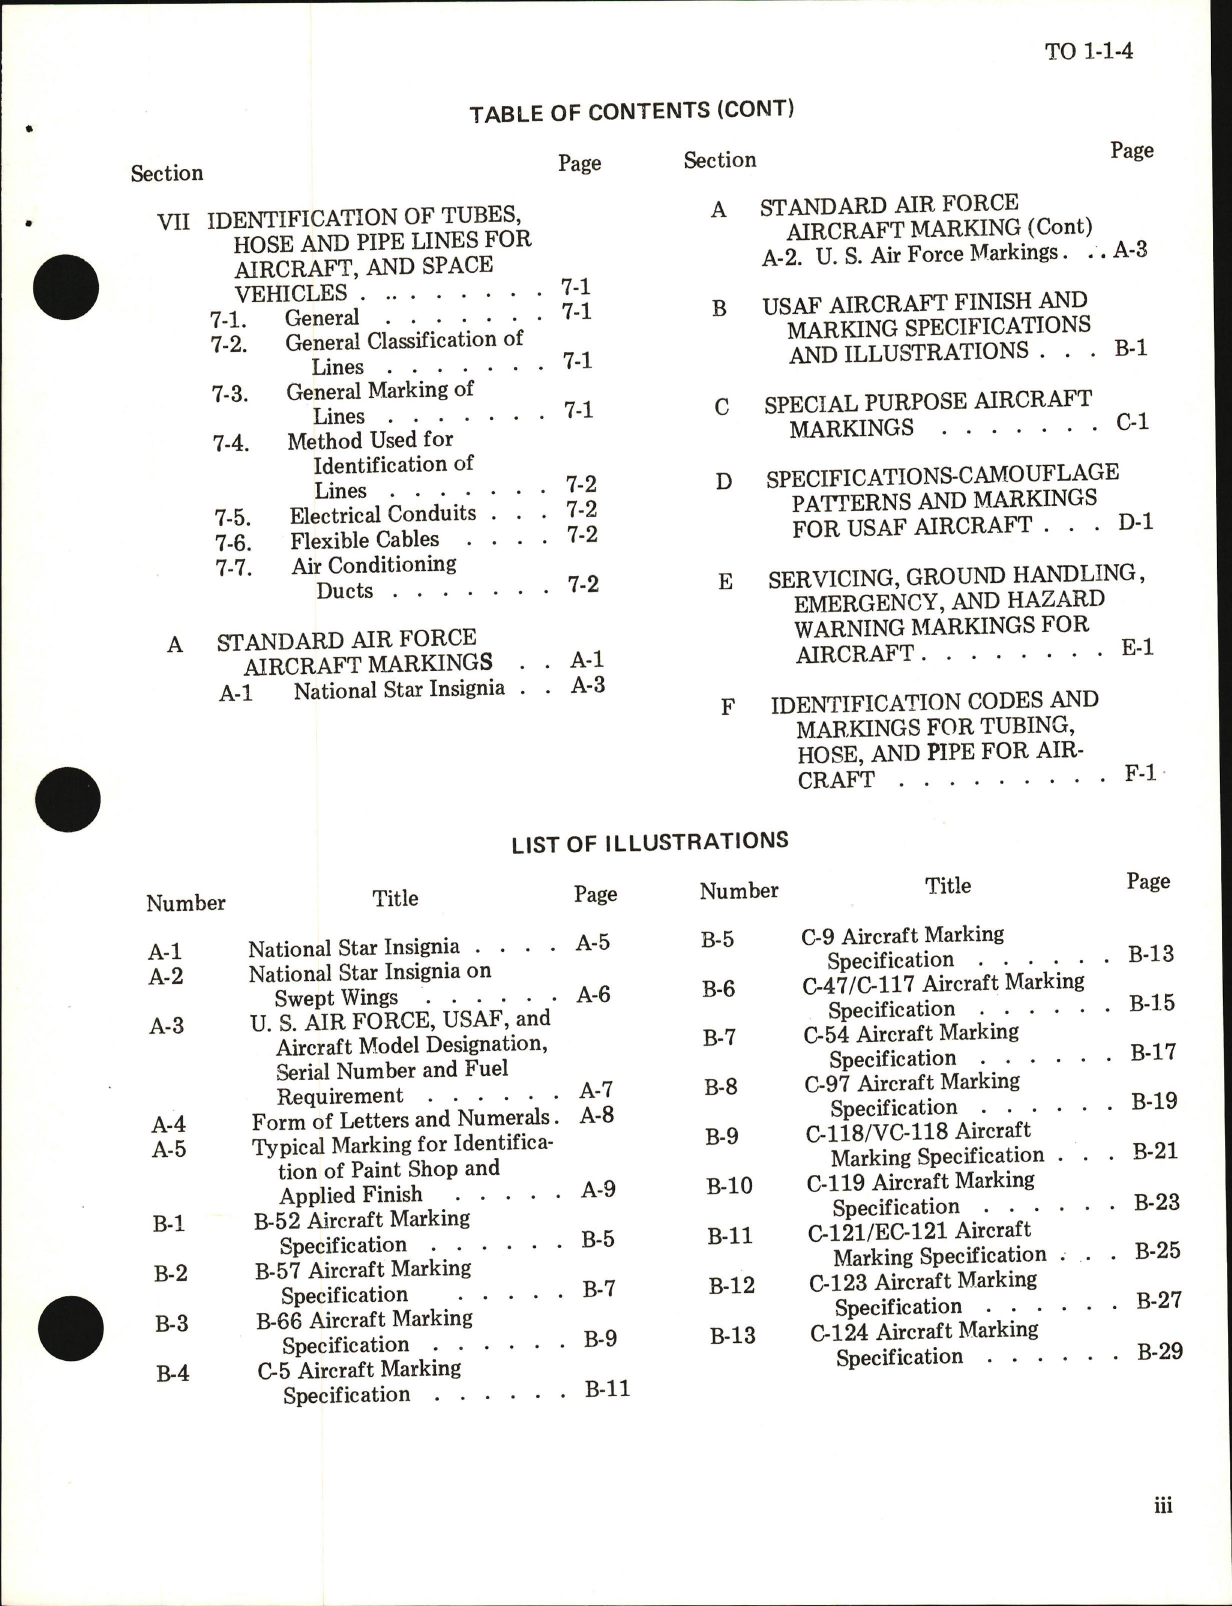 Sample page 5 from AirCorps Library document: Exterior Finishes, Insignia and Markings for USAF Aircraft - Change - 9